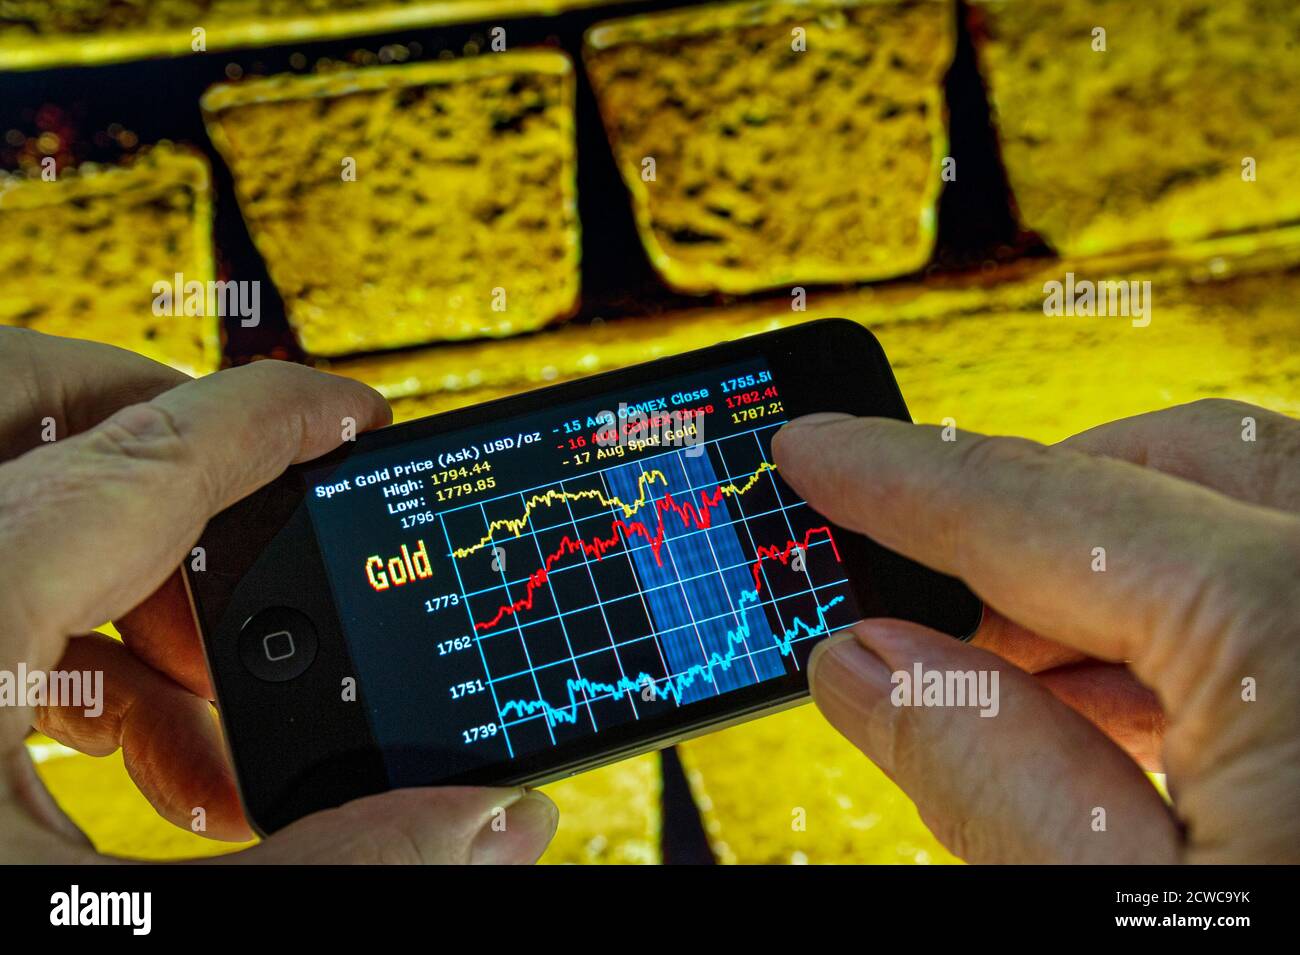 GOLD PRICES Apple iPhone smartphone displaying live on-screen gold bid prices, with pure raw gold bullion bars in background Stock Photo